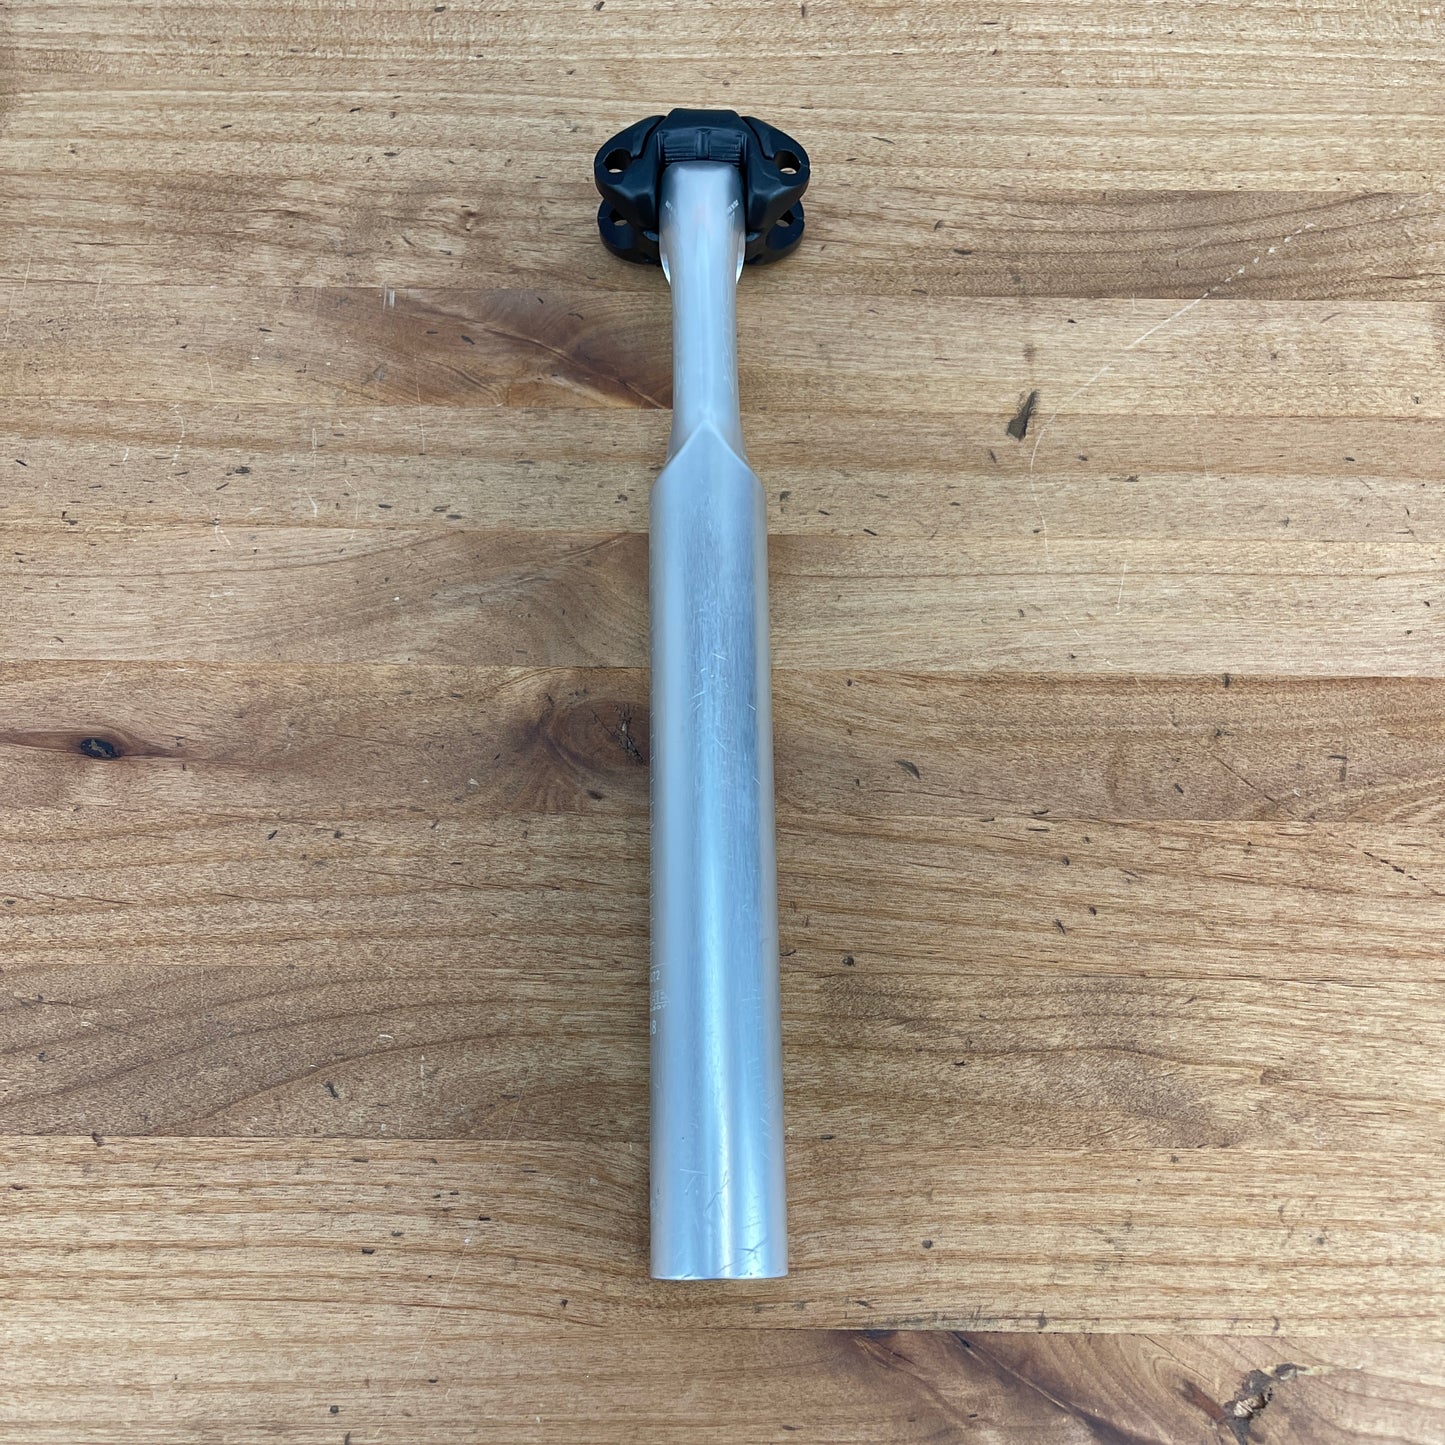 New Take-off! Miche 27.2mm x 260mm Alloy Cycling Seatpost 20mm Setback 268g